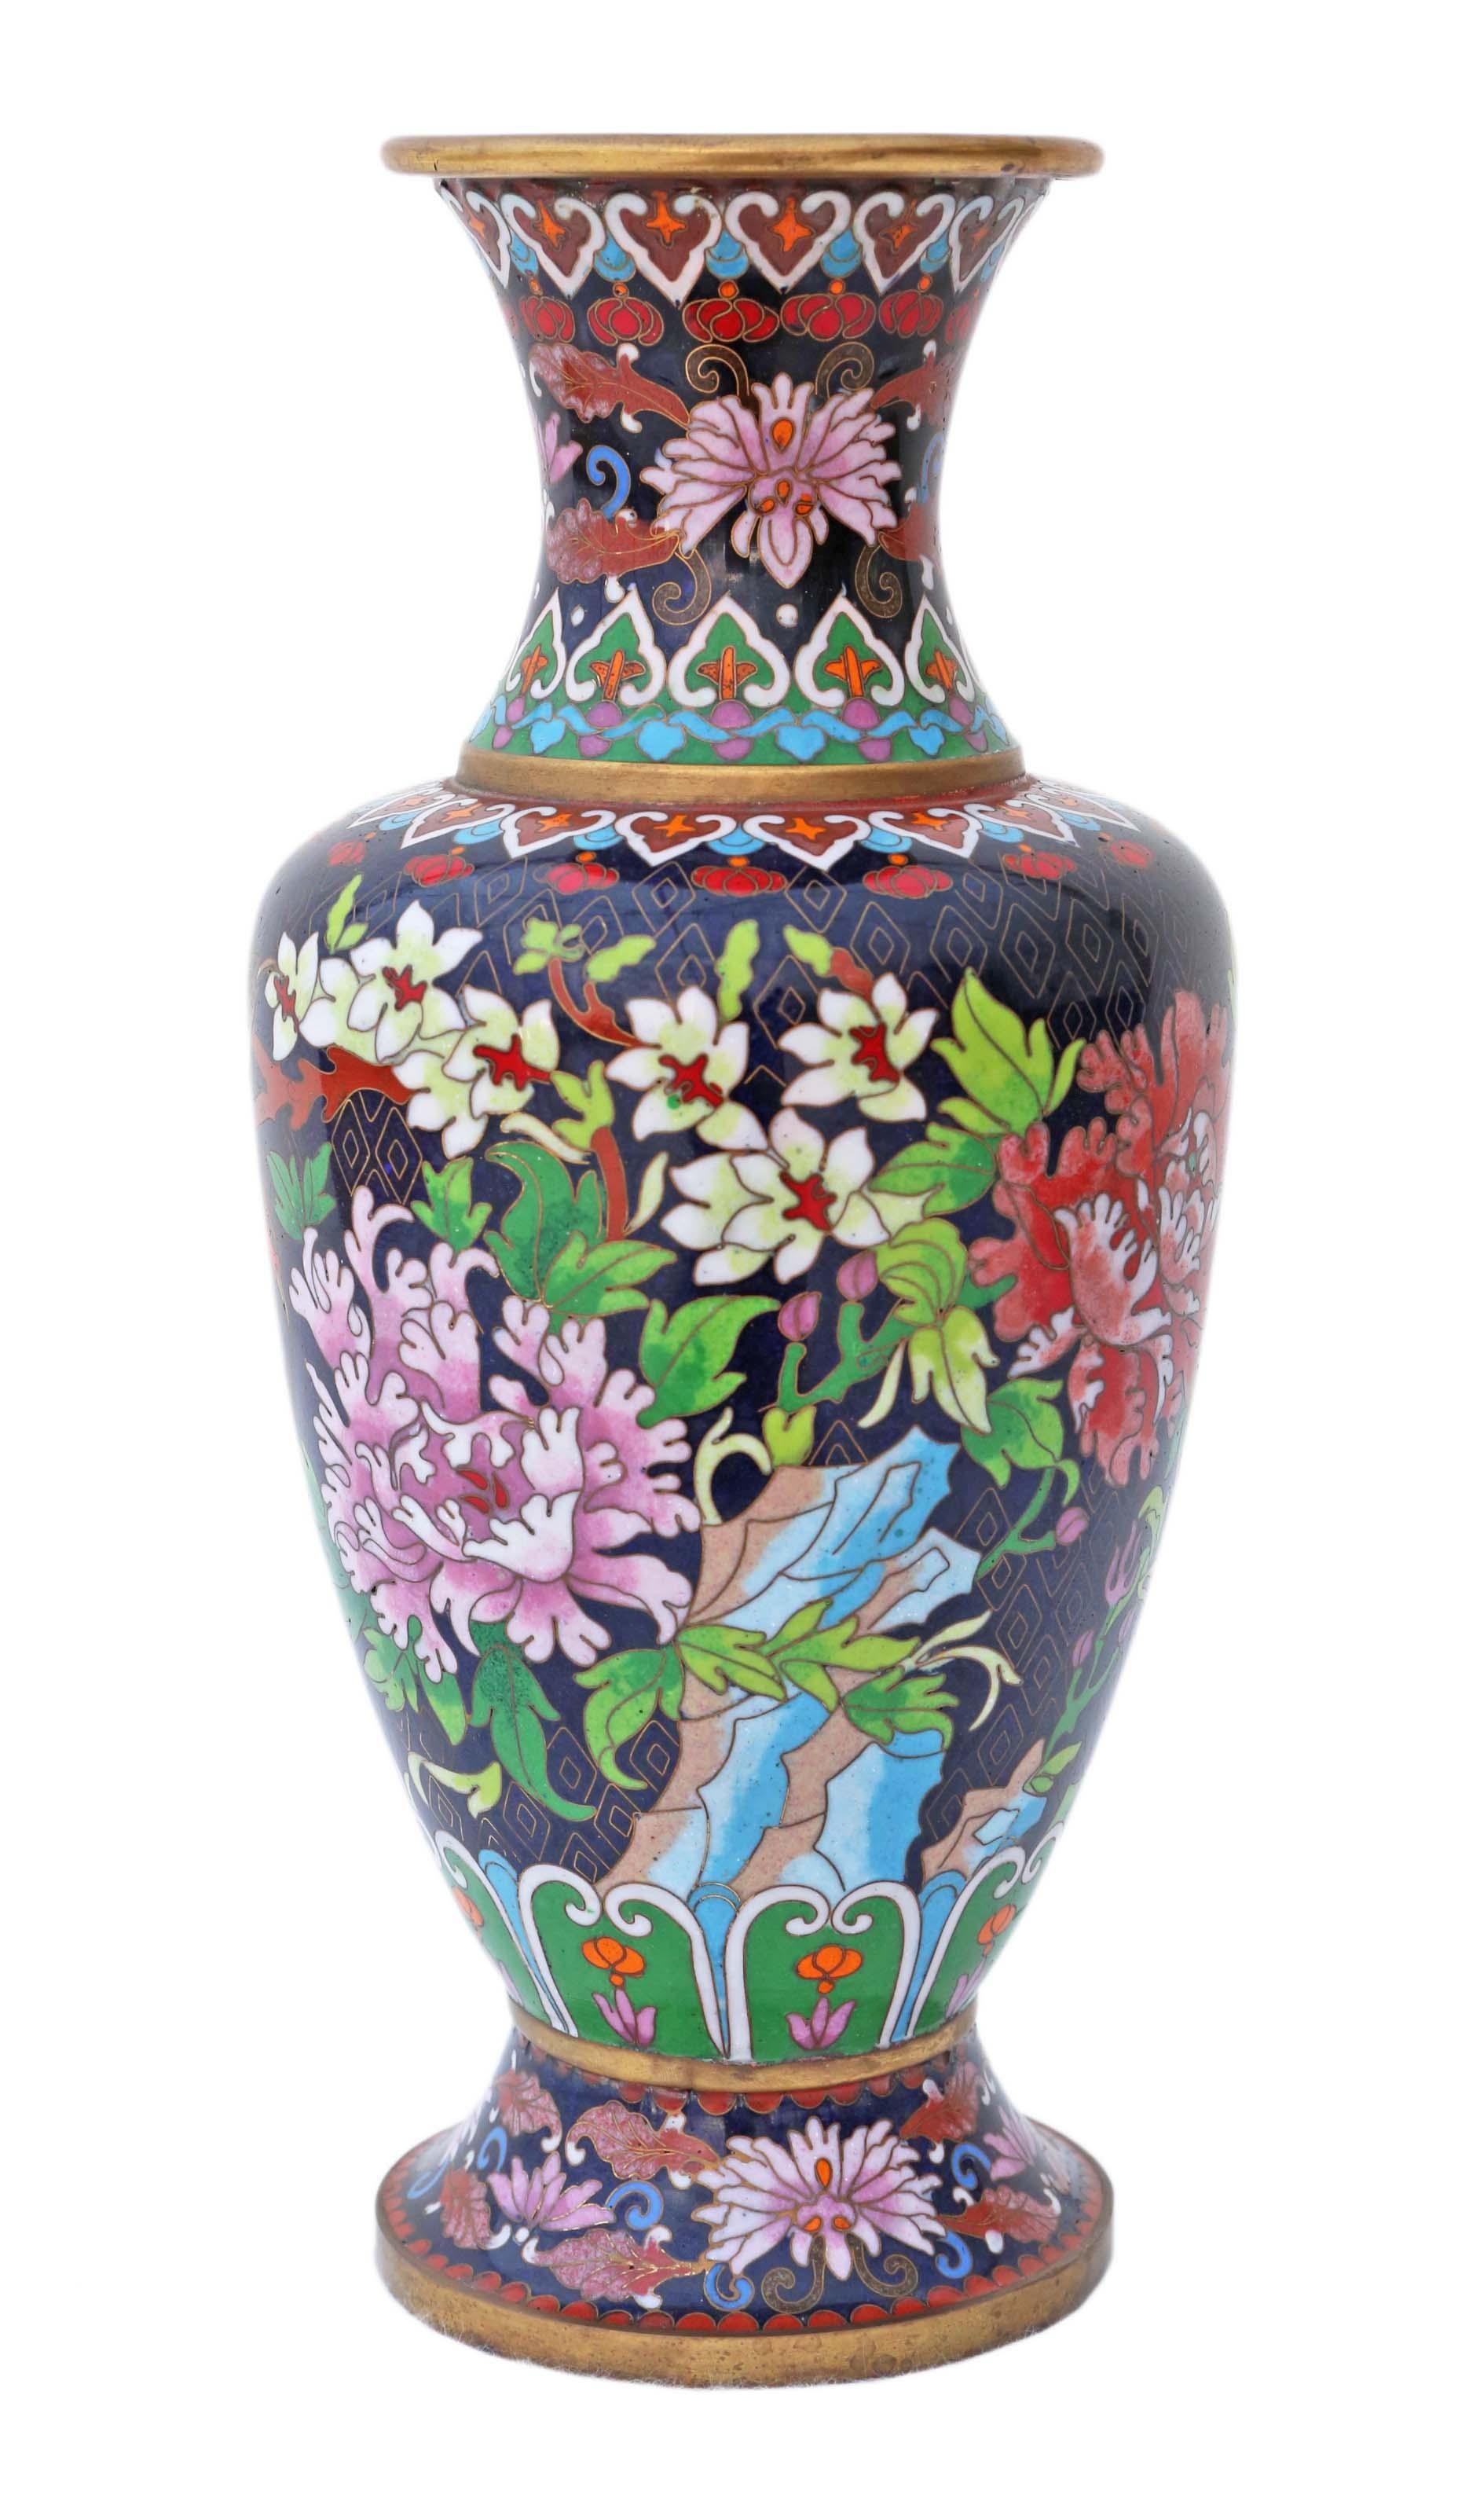 Antique large early 20th century Oriental cloisonné vase. Made of brass/bronze with enamel, gilt and stone decoration.
A lovely quality piece with large impressive proportions.
Would look amazing in the right location!
Overall maximum dimensions: